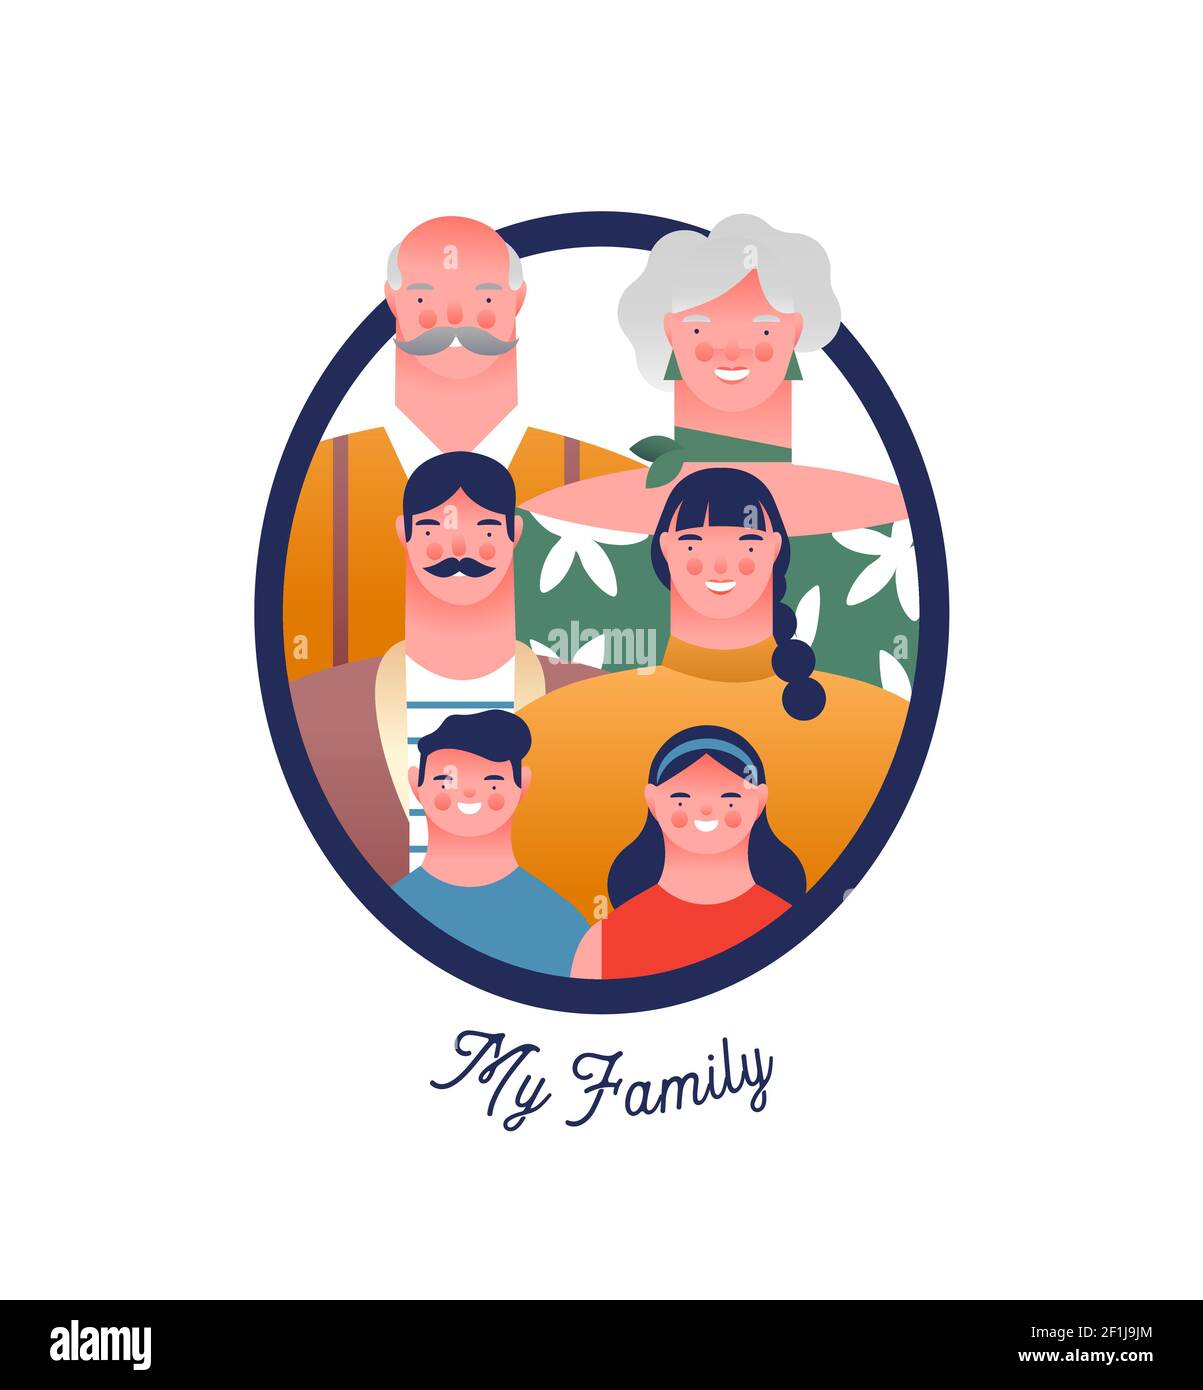 Happy family photo frame with mom, dad, grandparent and children. Families ancestry study or history education concept on isolated white background. Stock Vector